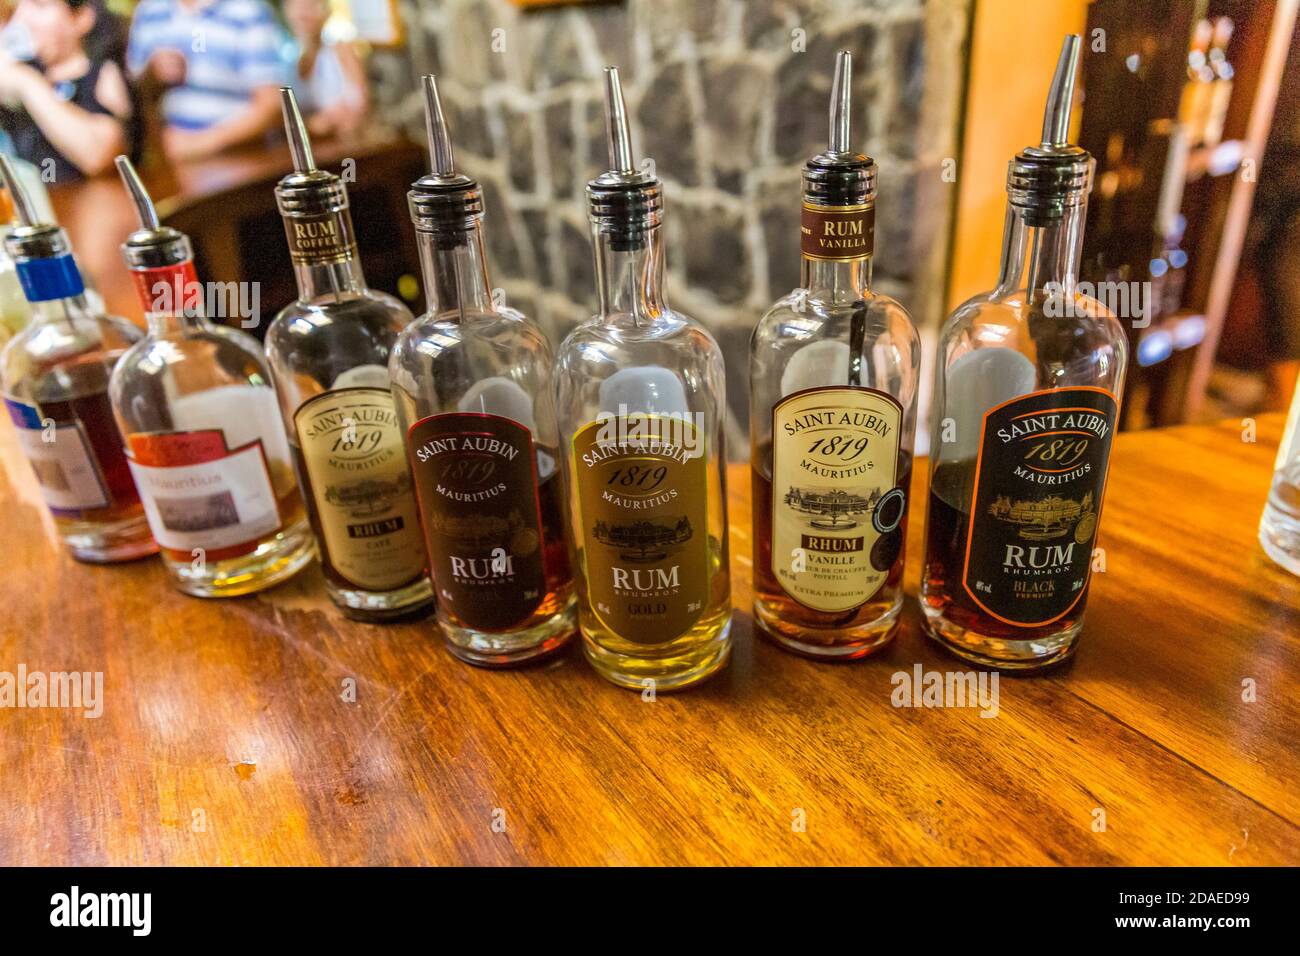 Different types of rum, rum distillery Le Saint Aubin, founded in 1819,  colonial-style house, Saint Aubin, Mauritius, Africa, Indian Ocean Stock  Photo - Alamy